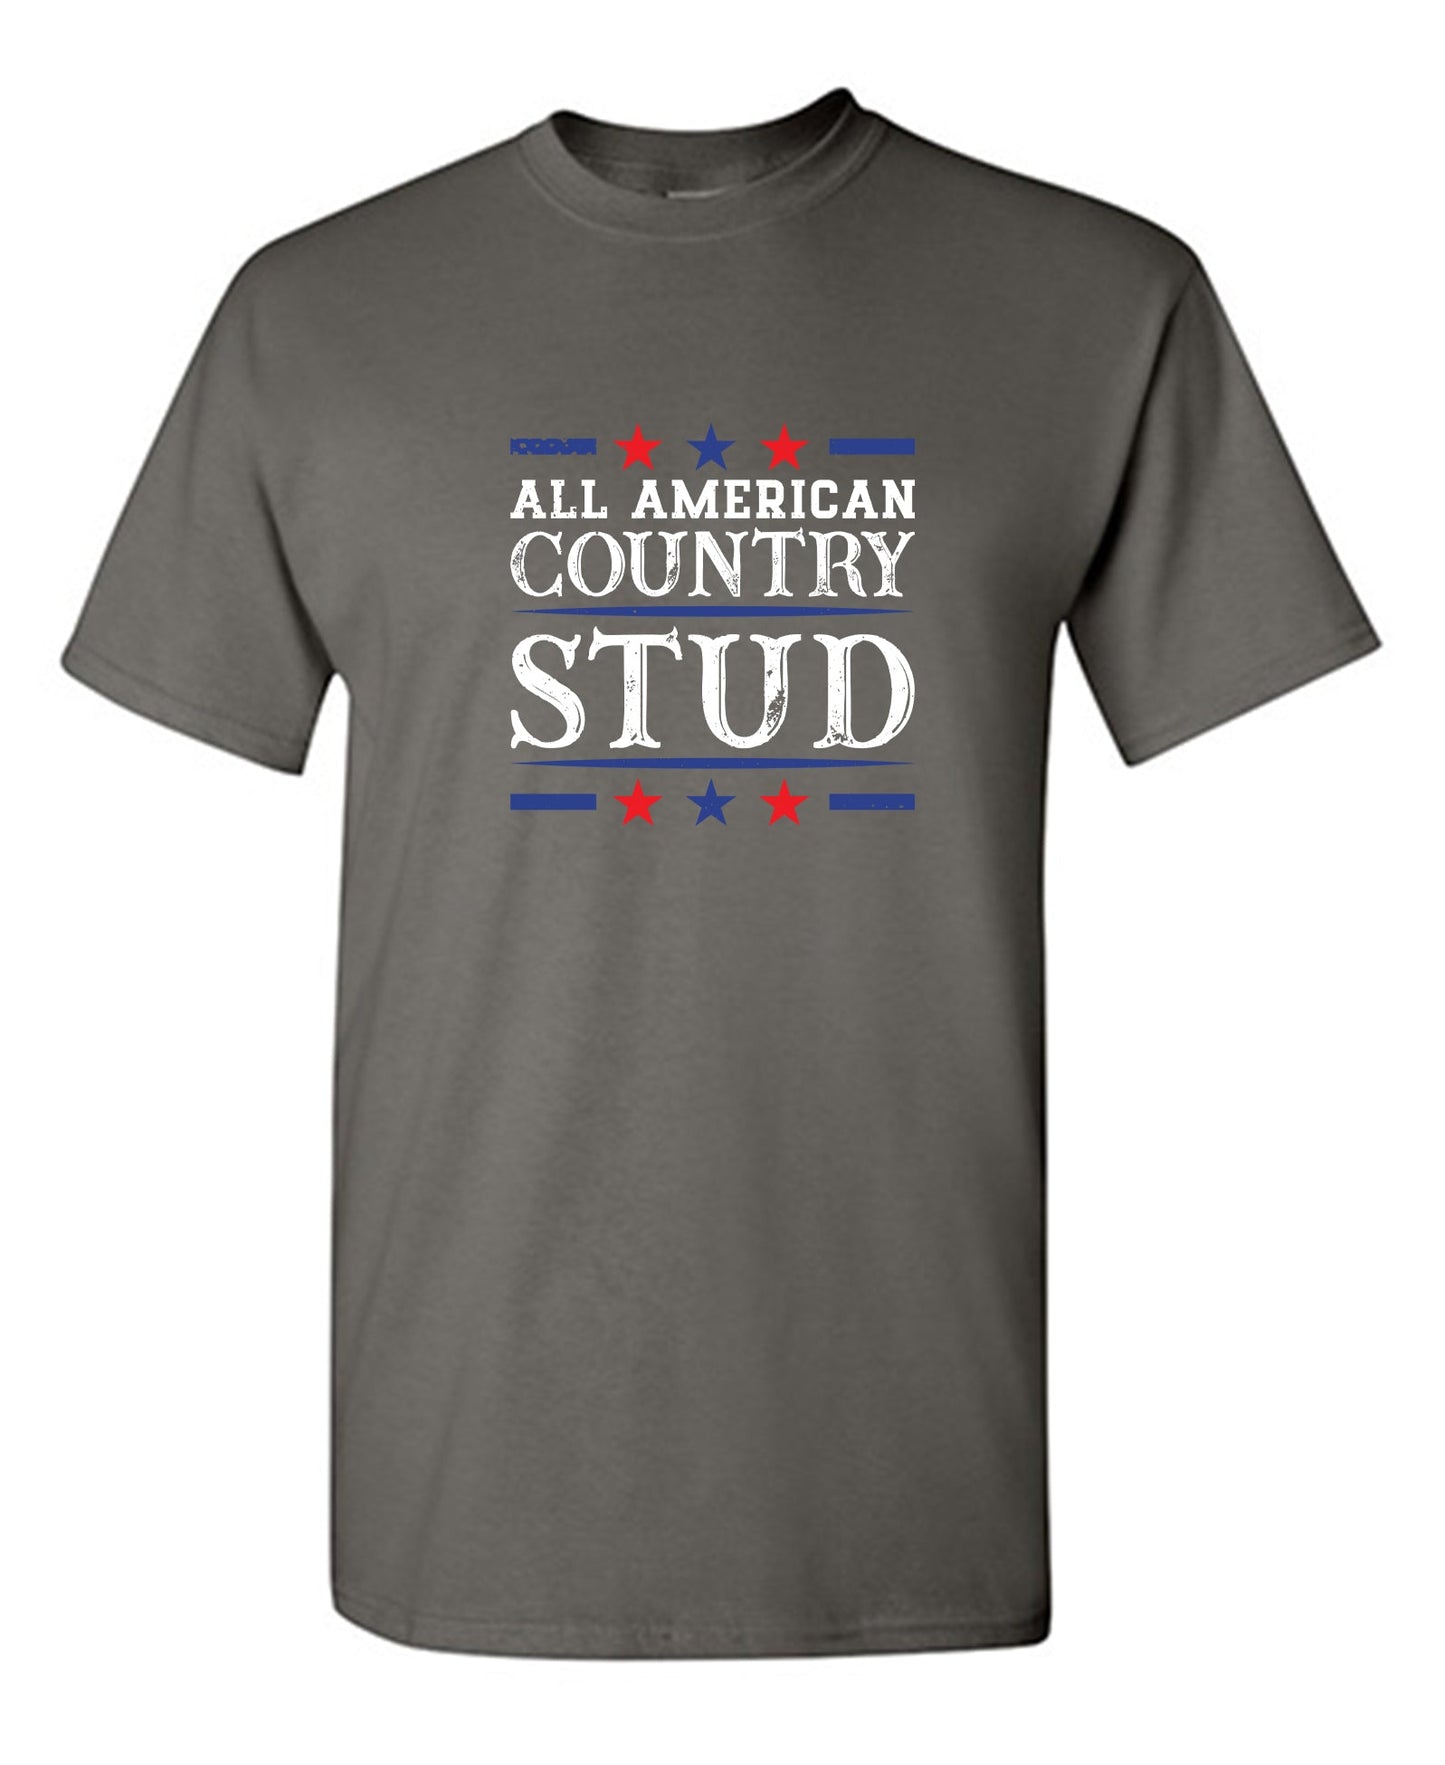 All American Country Stud - Funny T Shirts & Graphic Tees